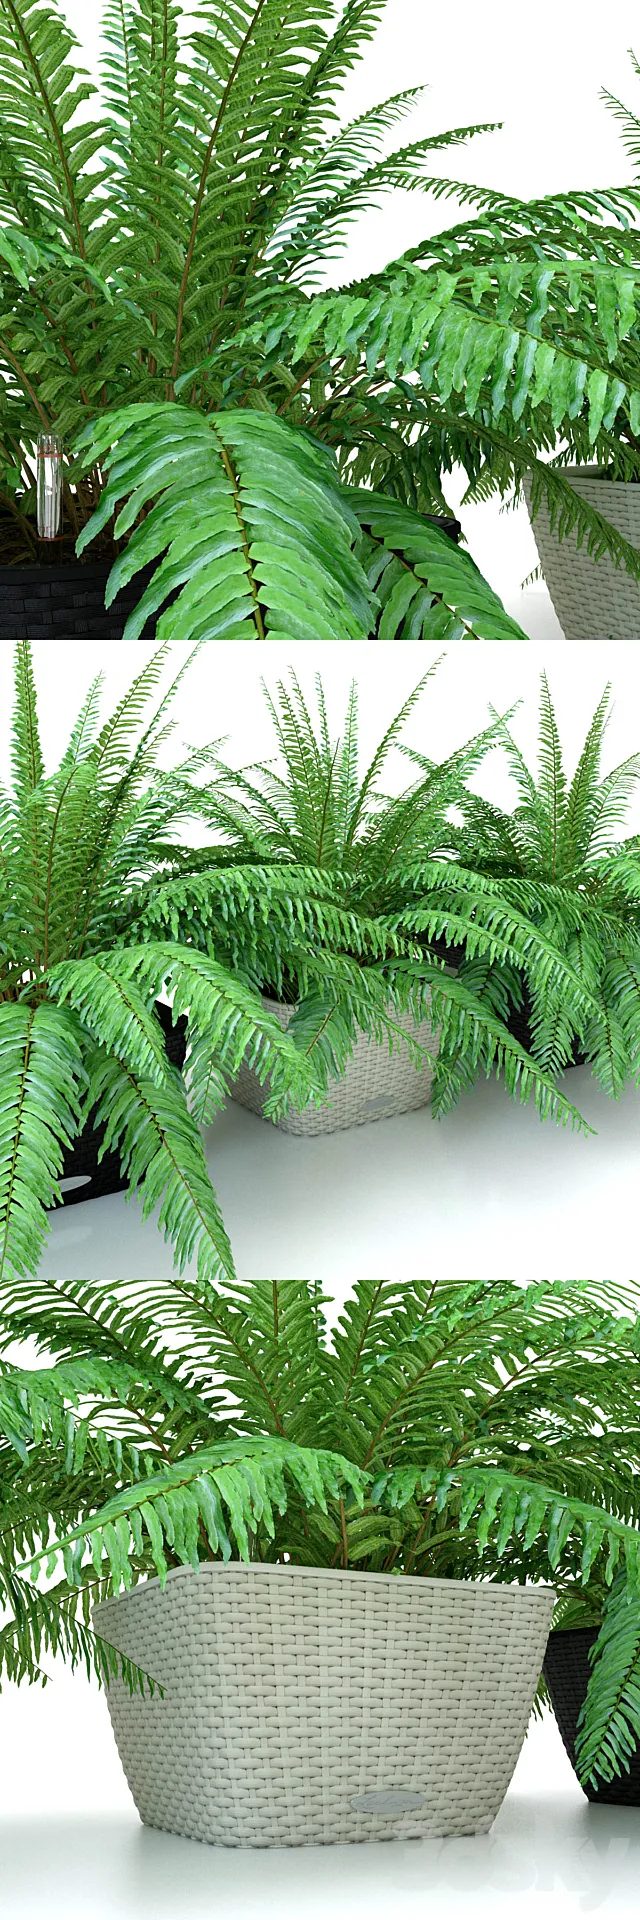 Fern _ Nephrolepis in pots Lechuza Bacino Cottage 3DSMax File